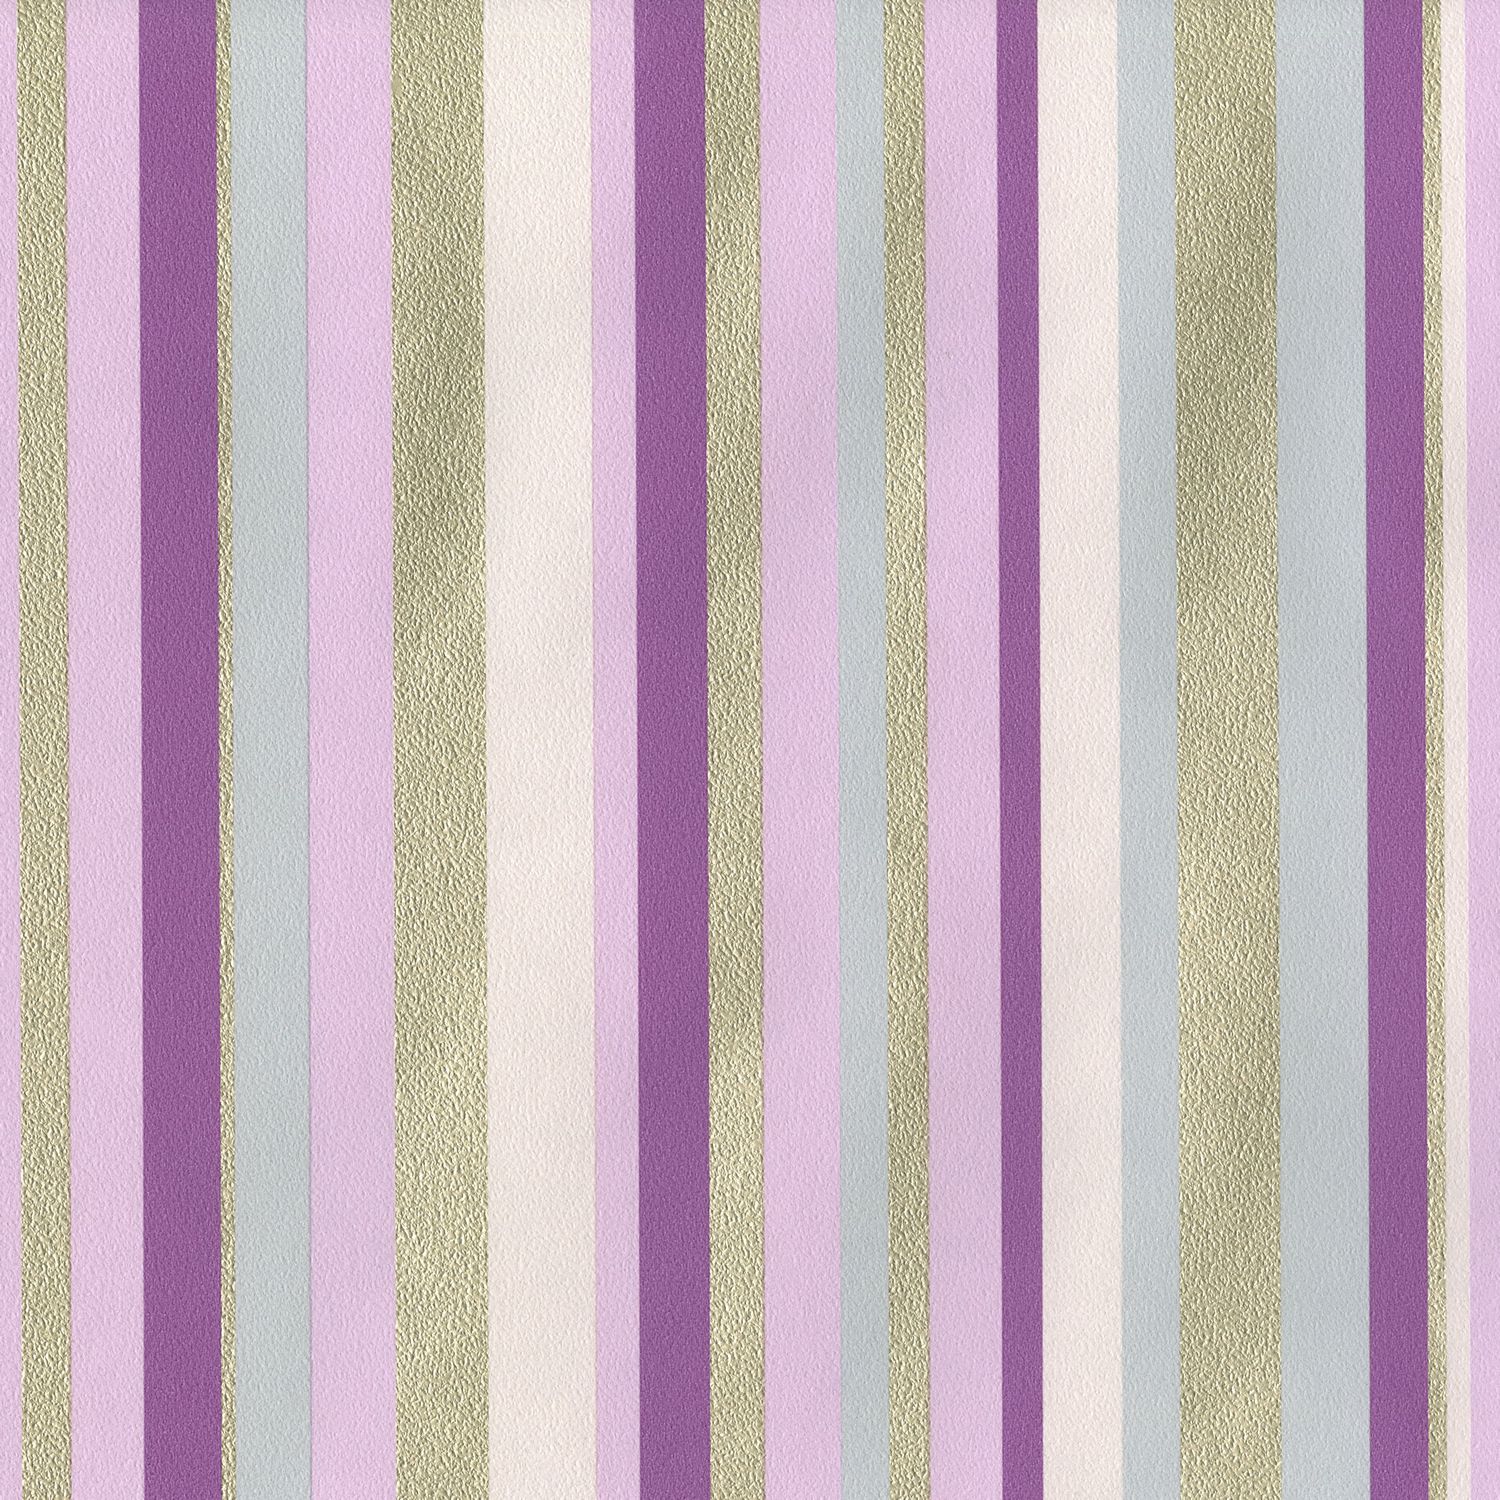 Striped Wallpaper – Next Day Delivery Striped Wallpaper from ...